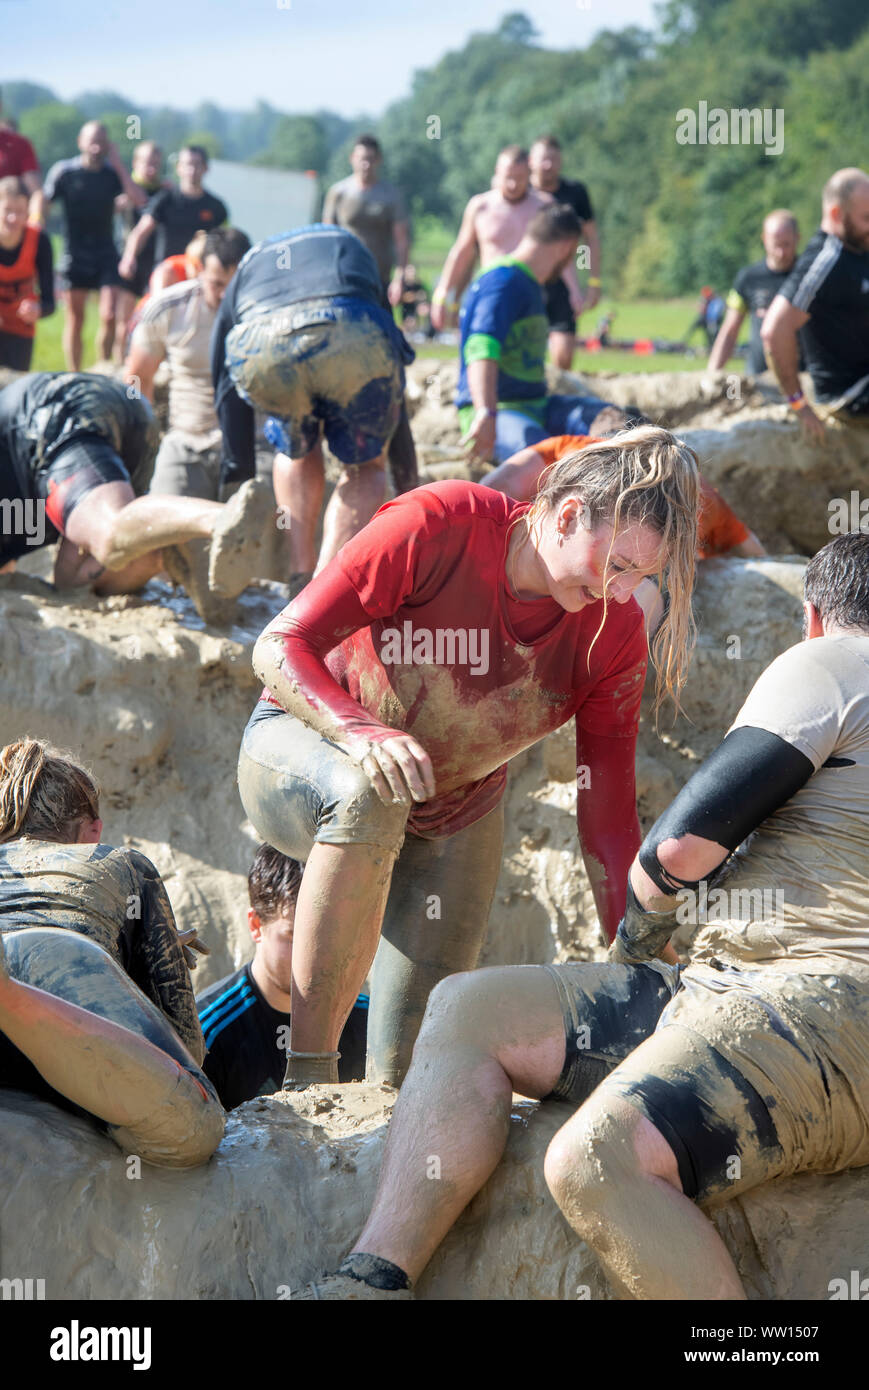 Contestants on the ‘Mud Mile’ at the Tough Mudder endurance event in Badminton Park, Gloucestershire UK Stock Photo